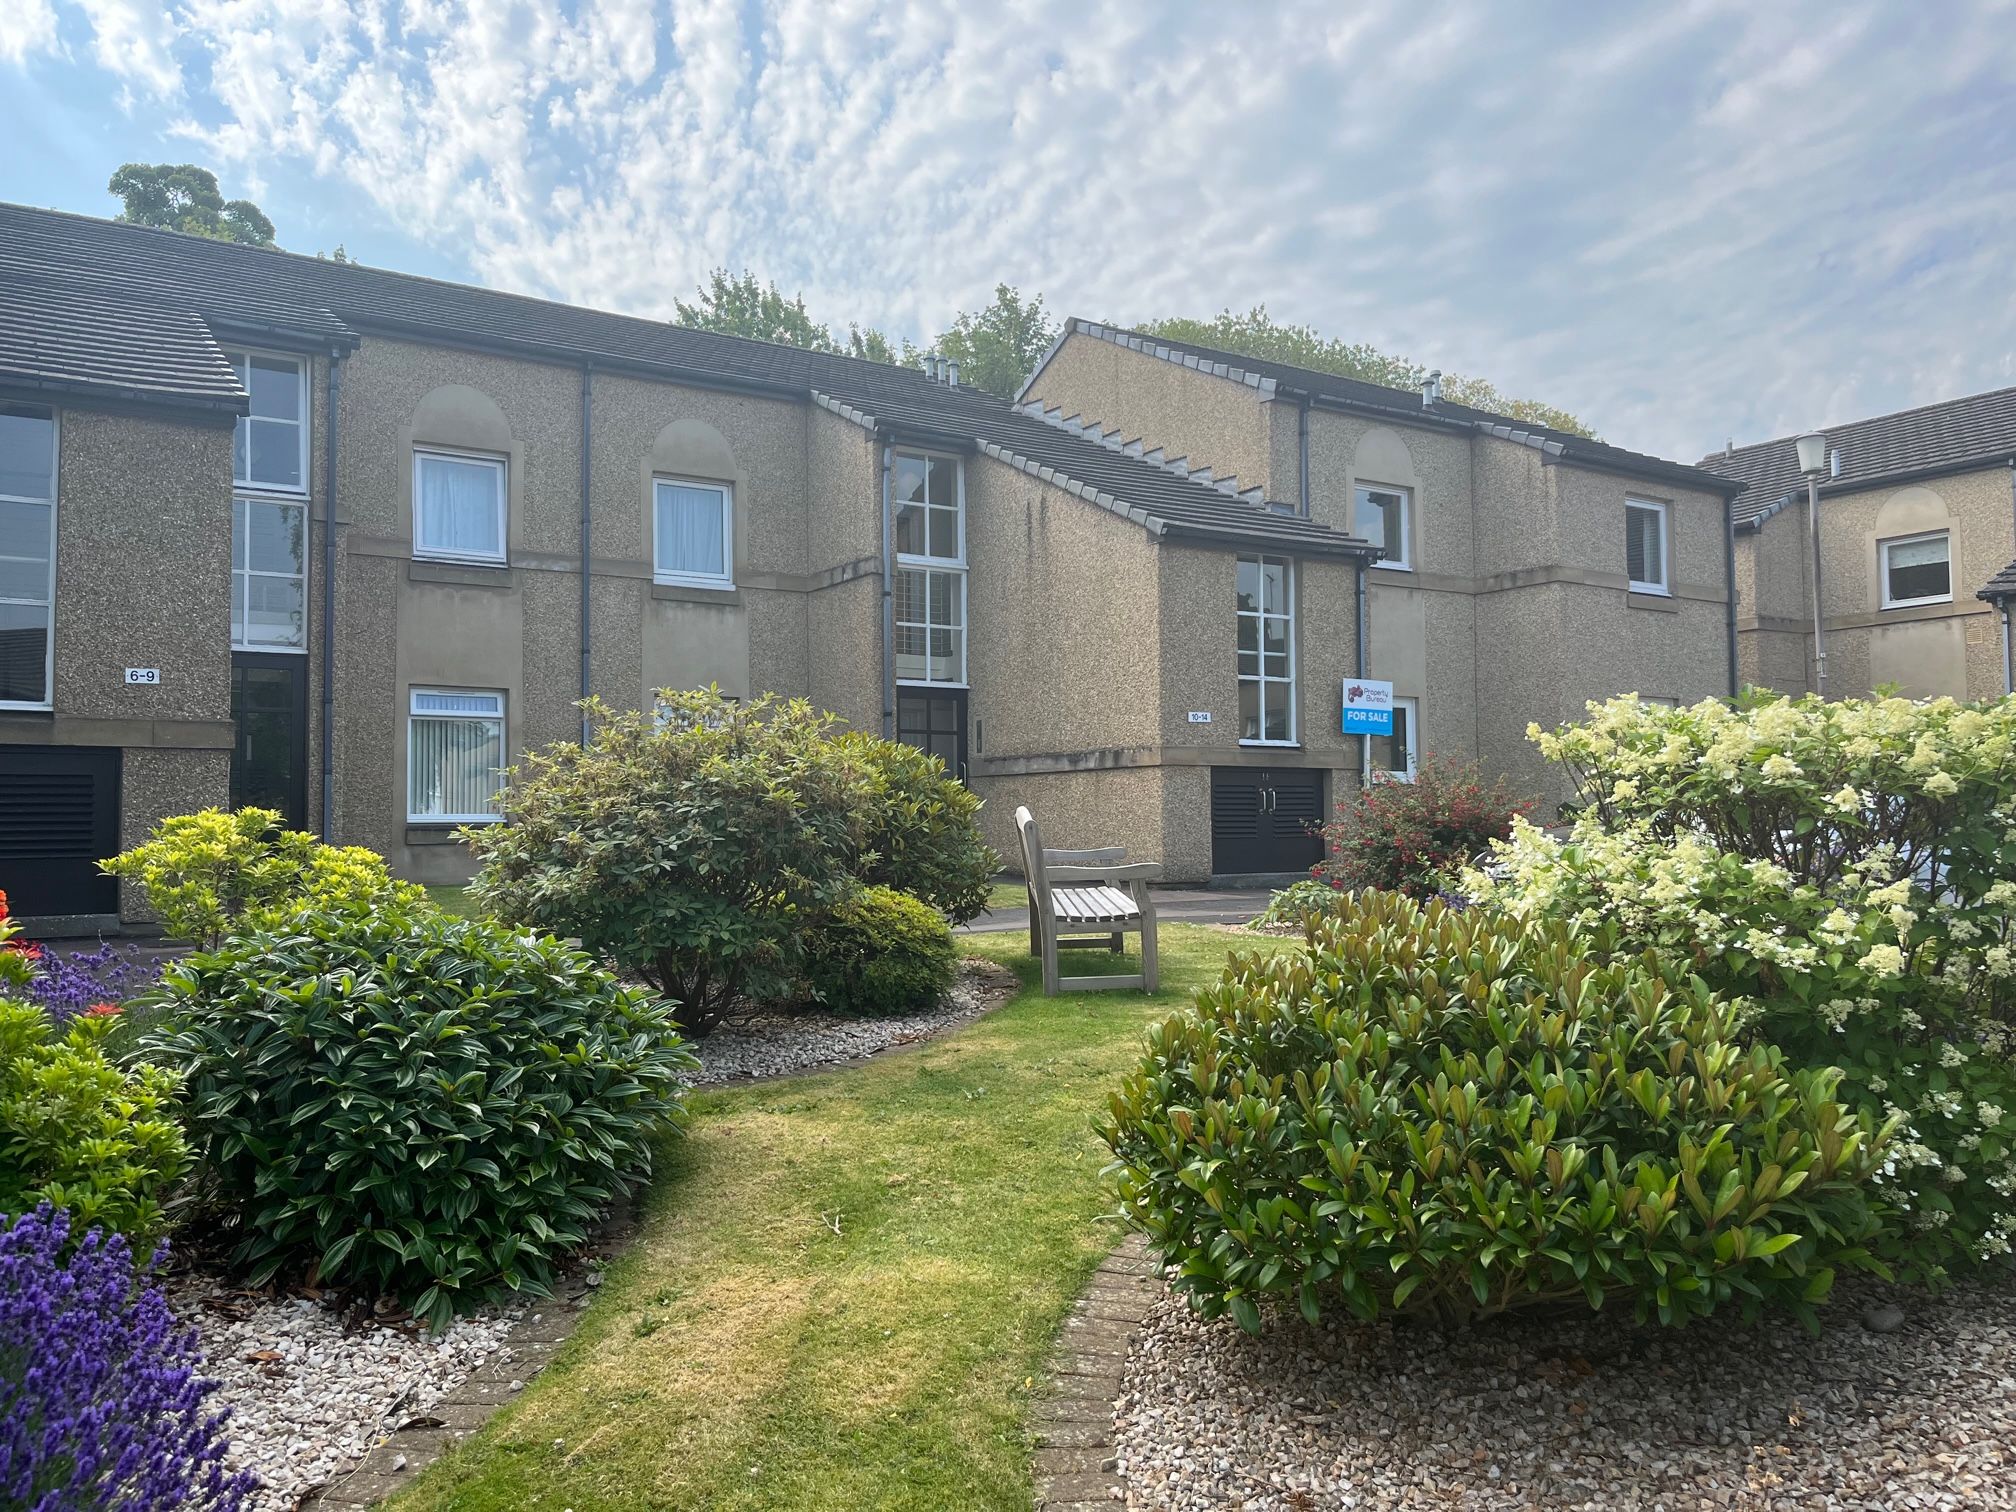 2 bed flat for sale in 14 Grendon Court, Kings Park, Stirling FK8 - Zoopla